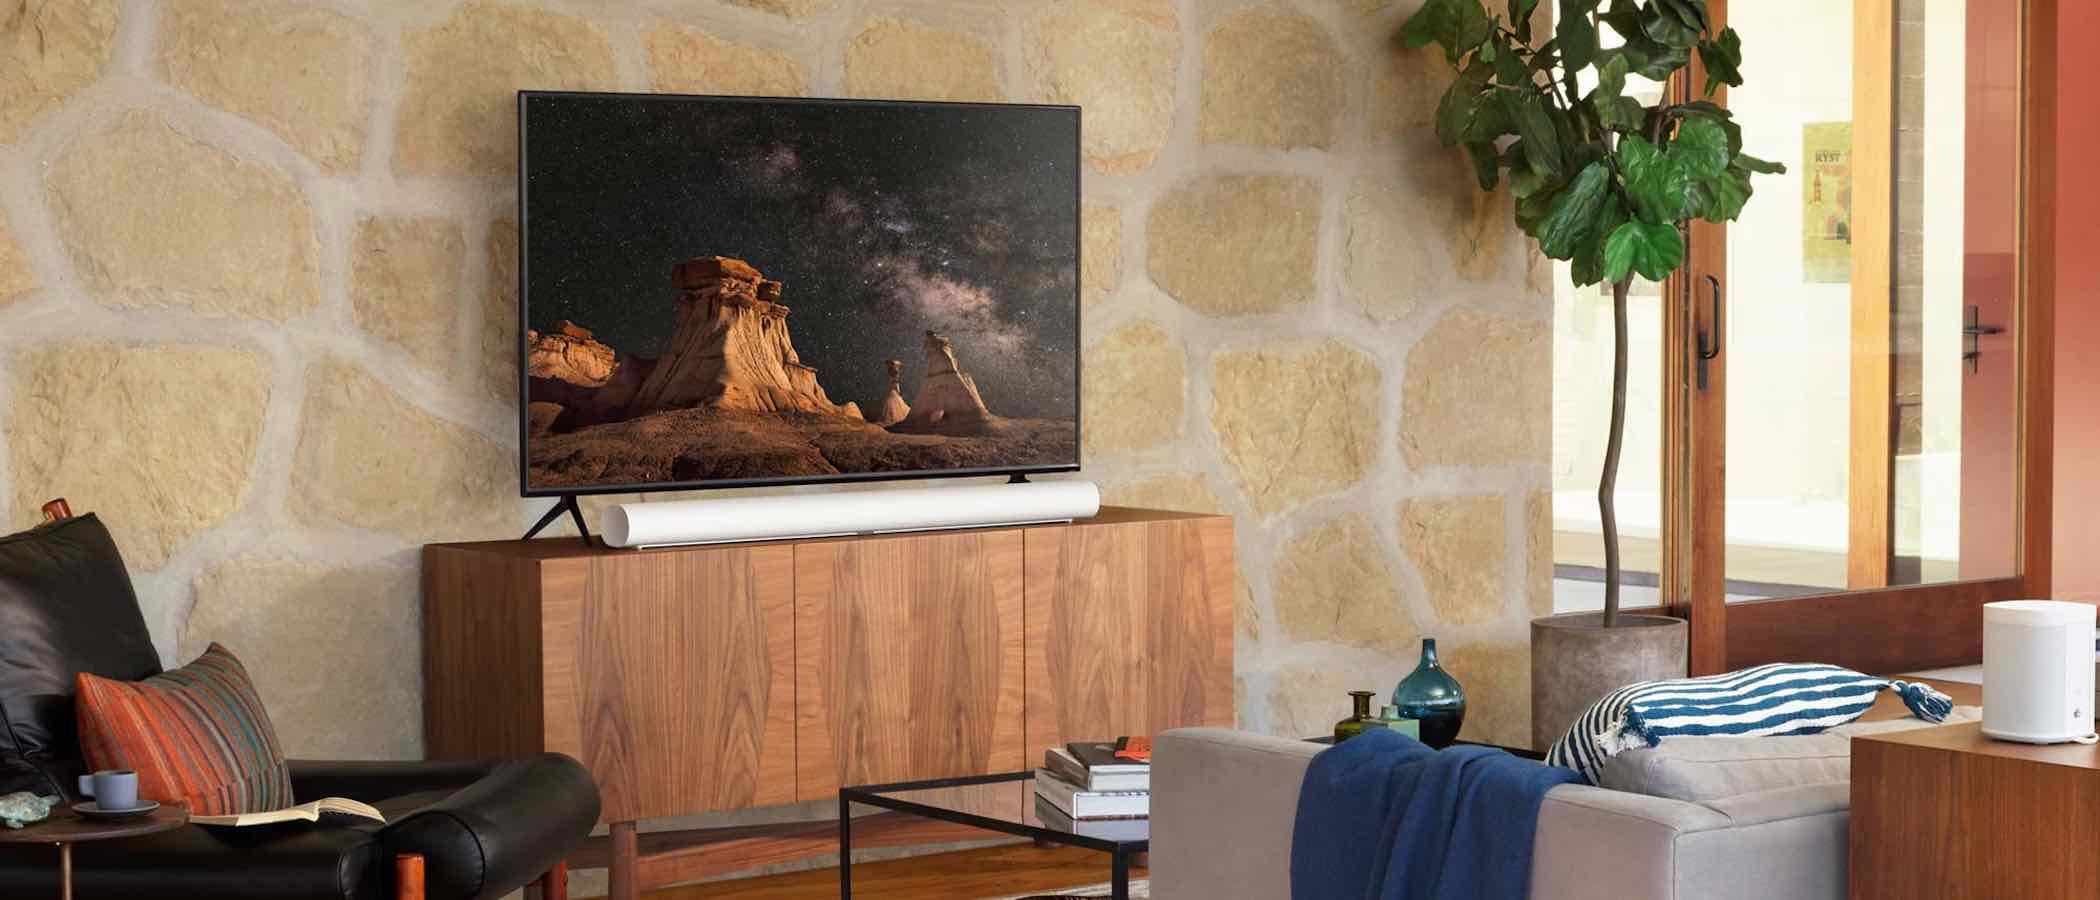 can a sound bar work with your receiver? 